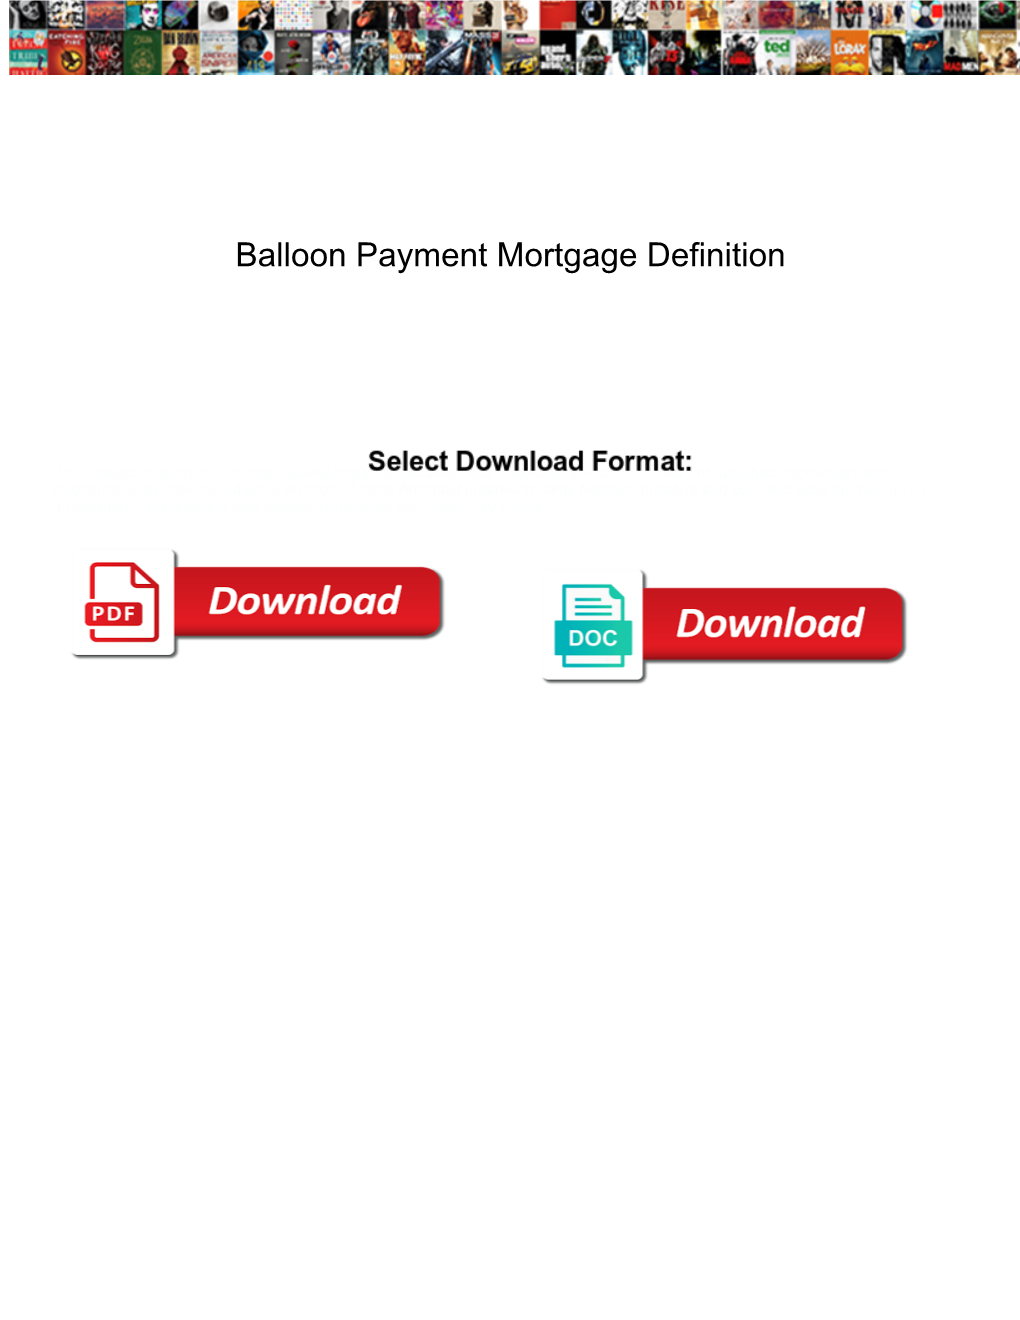 Balloon Payment Mortgage Definition